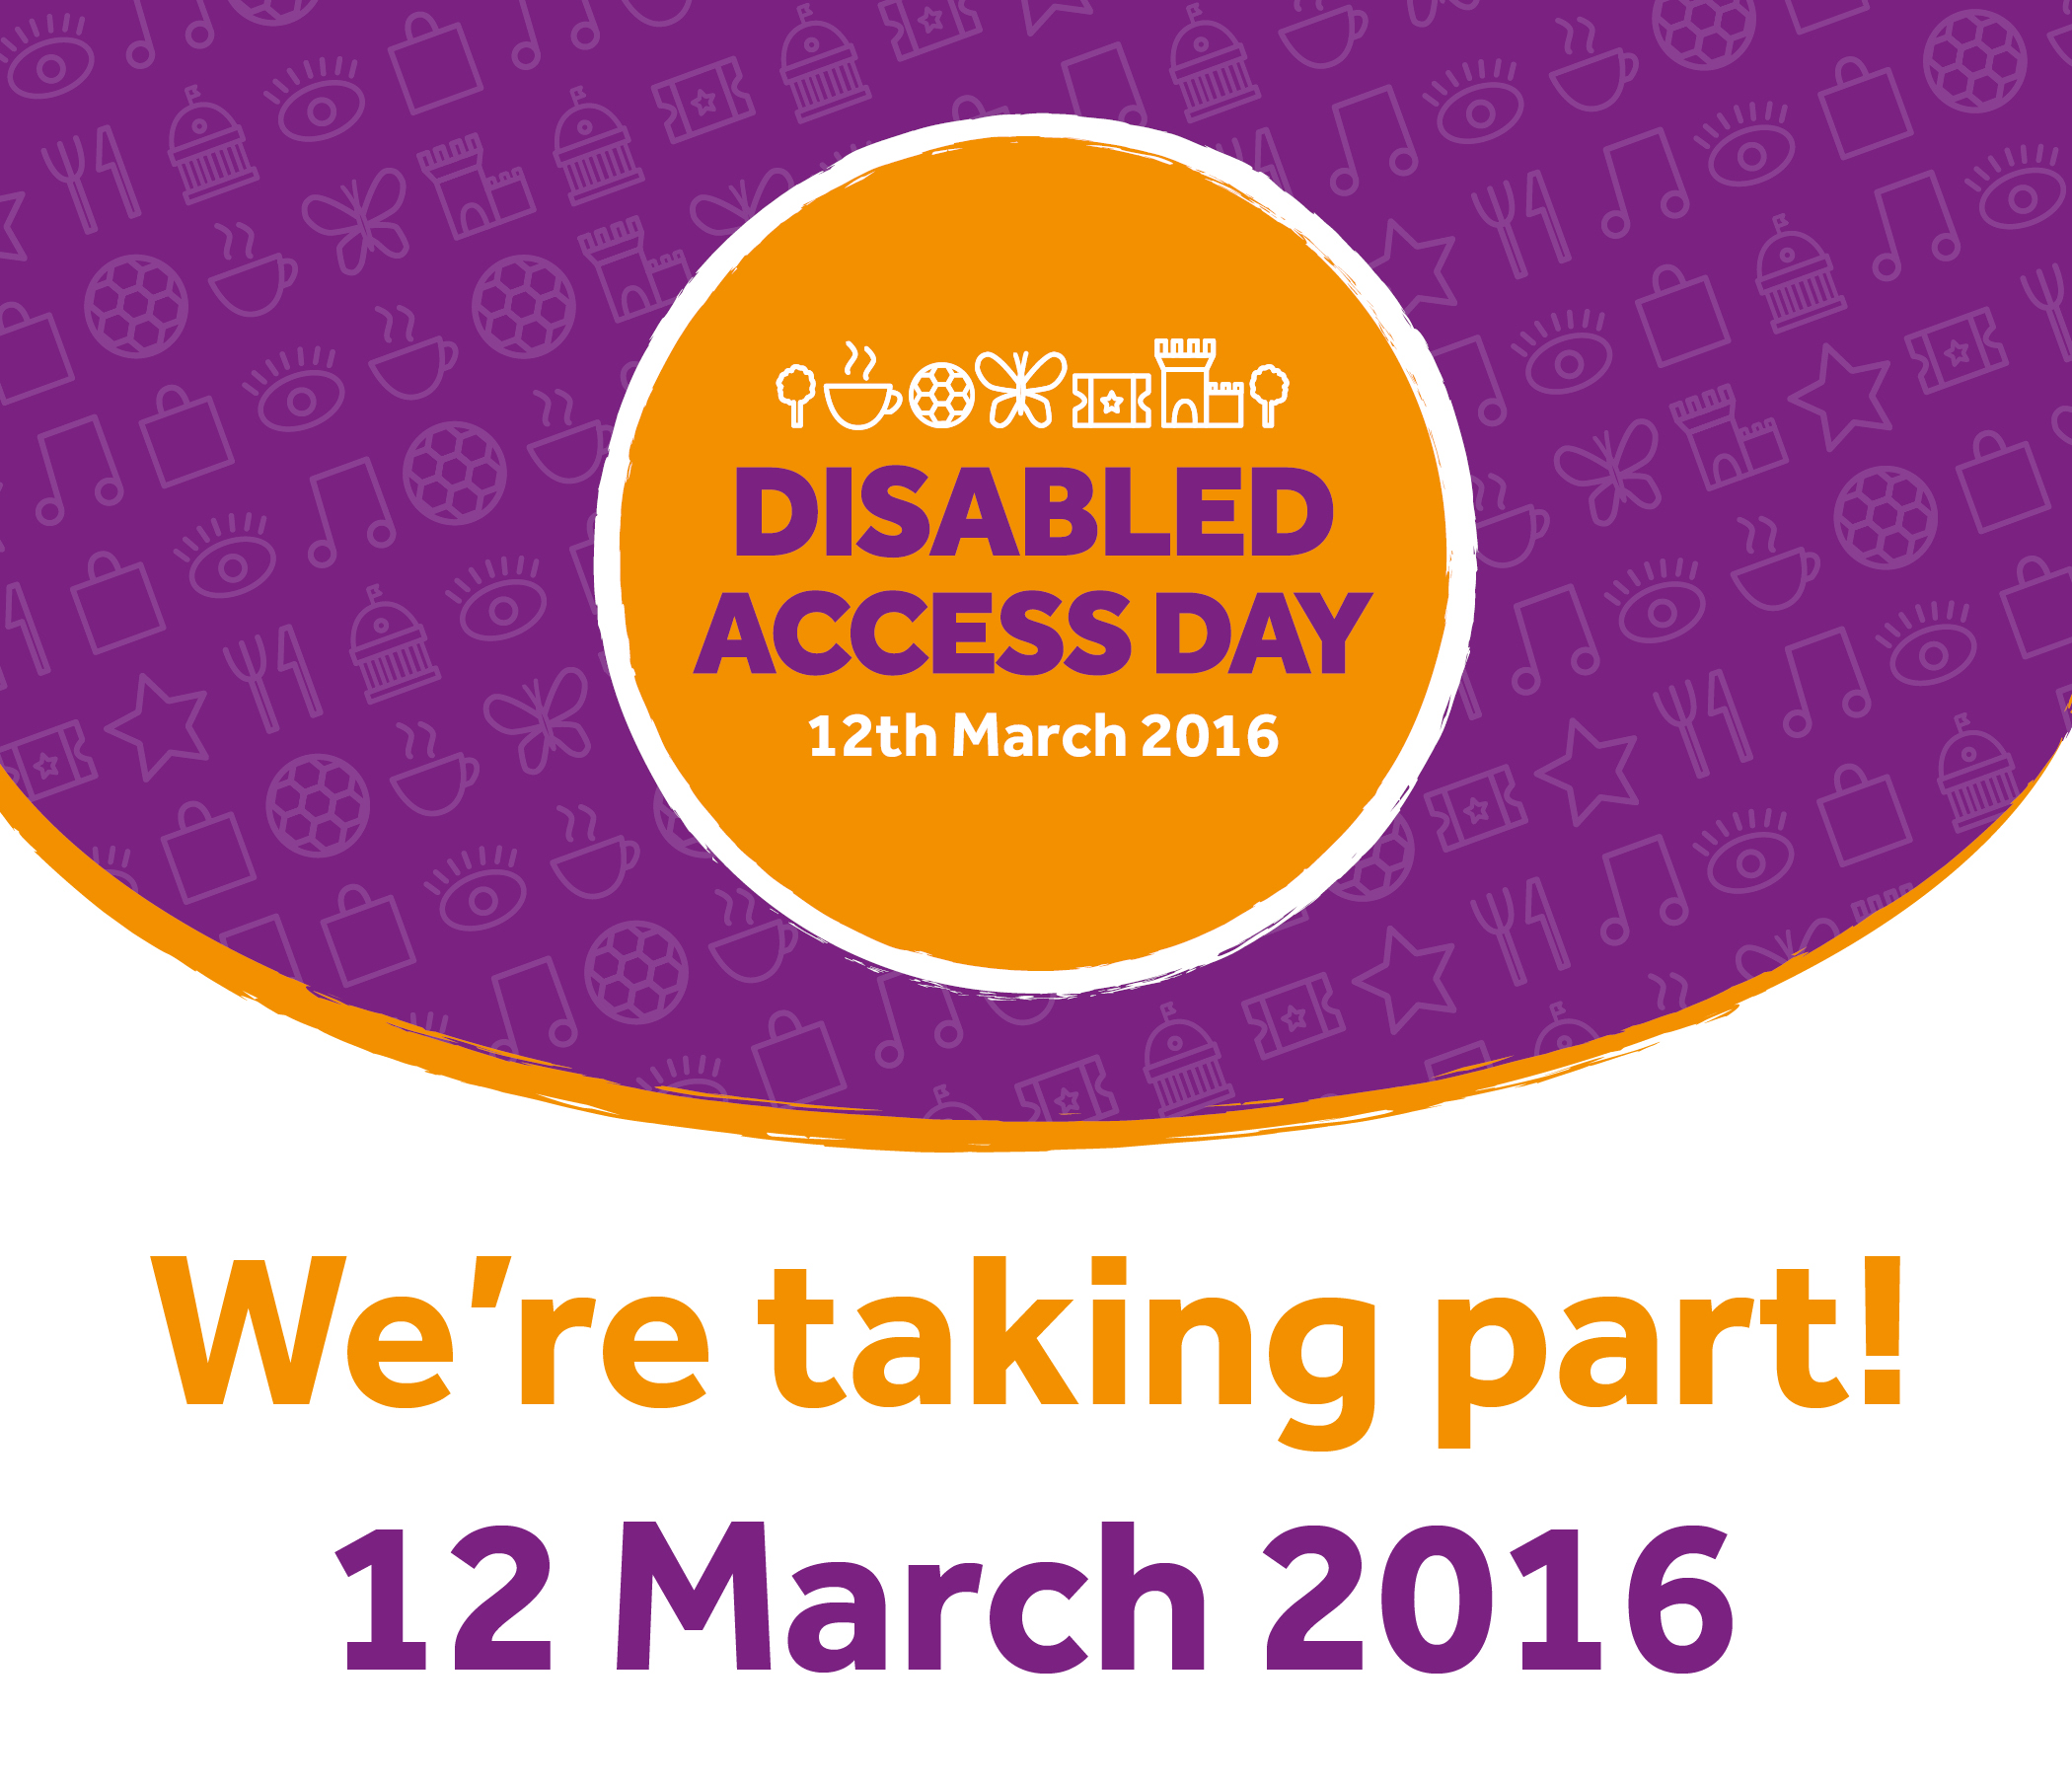 Theatre Free open day event for Disabled Access Day at Theatre Royal